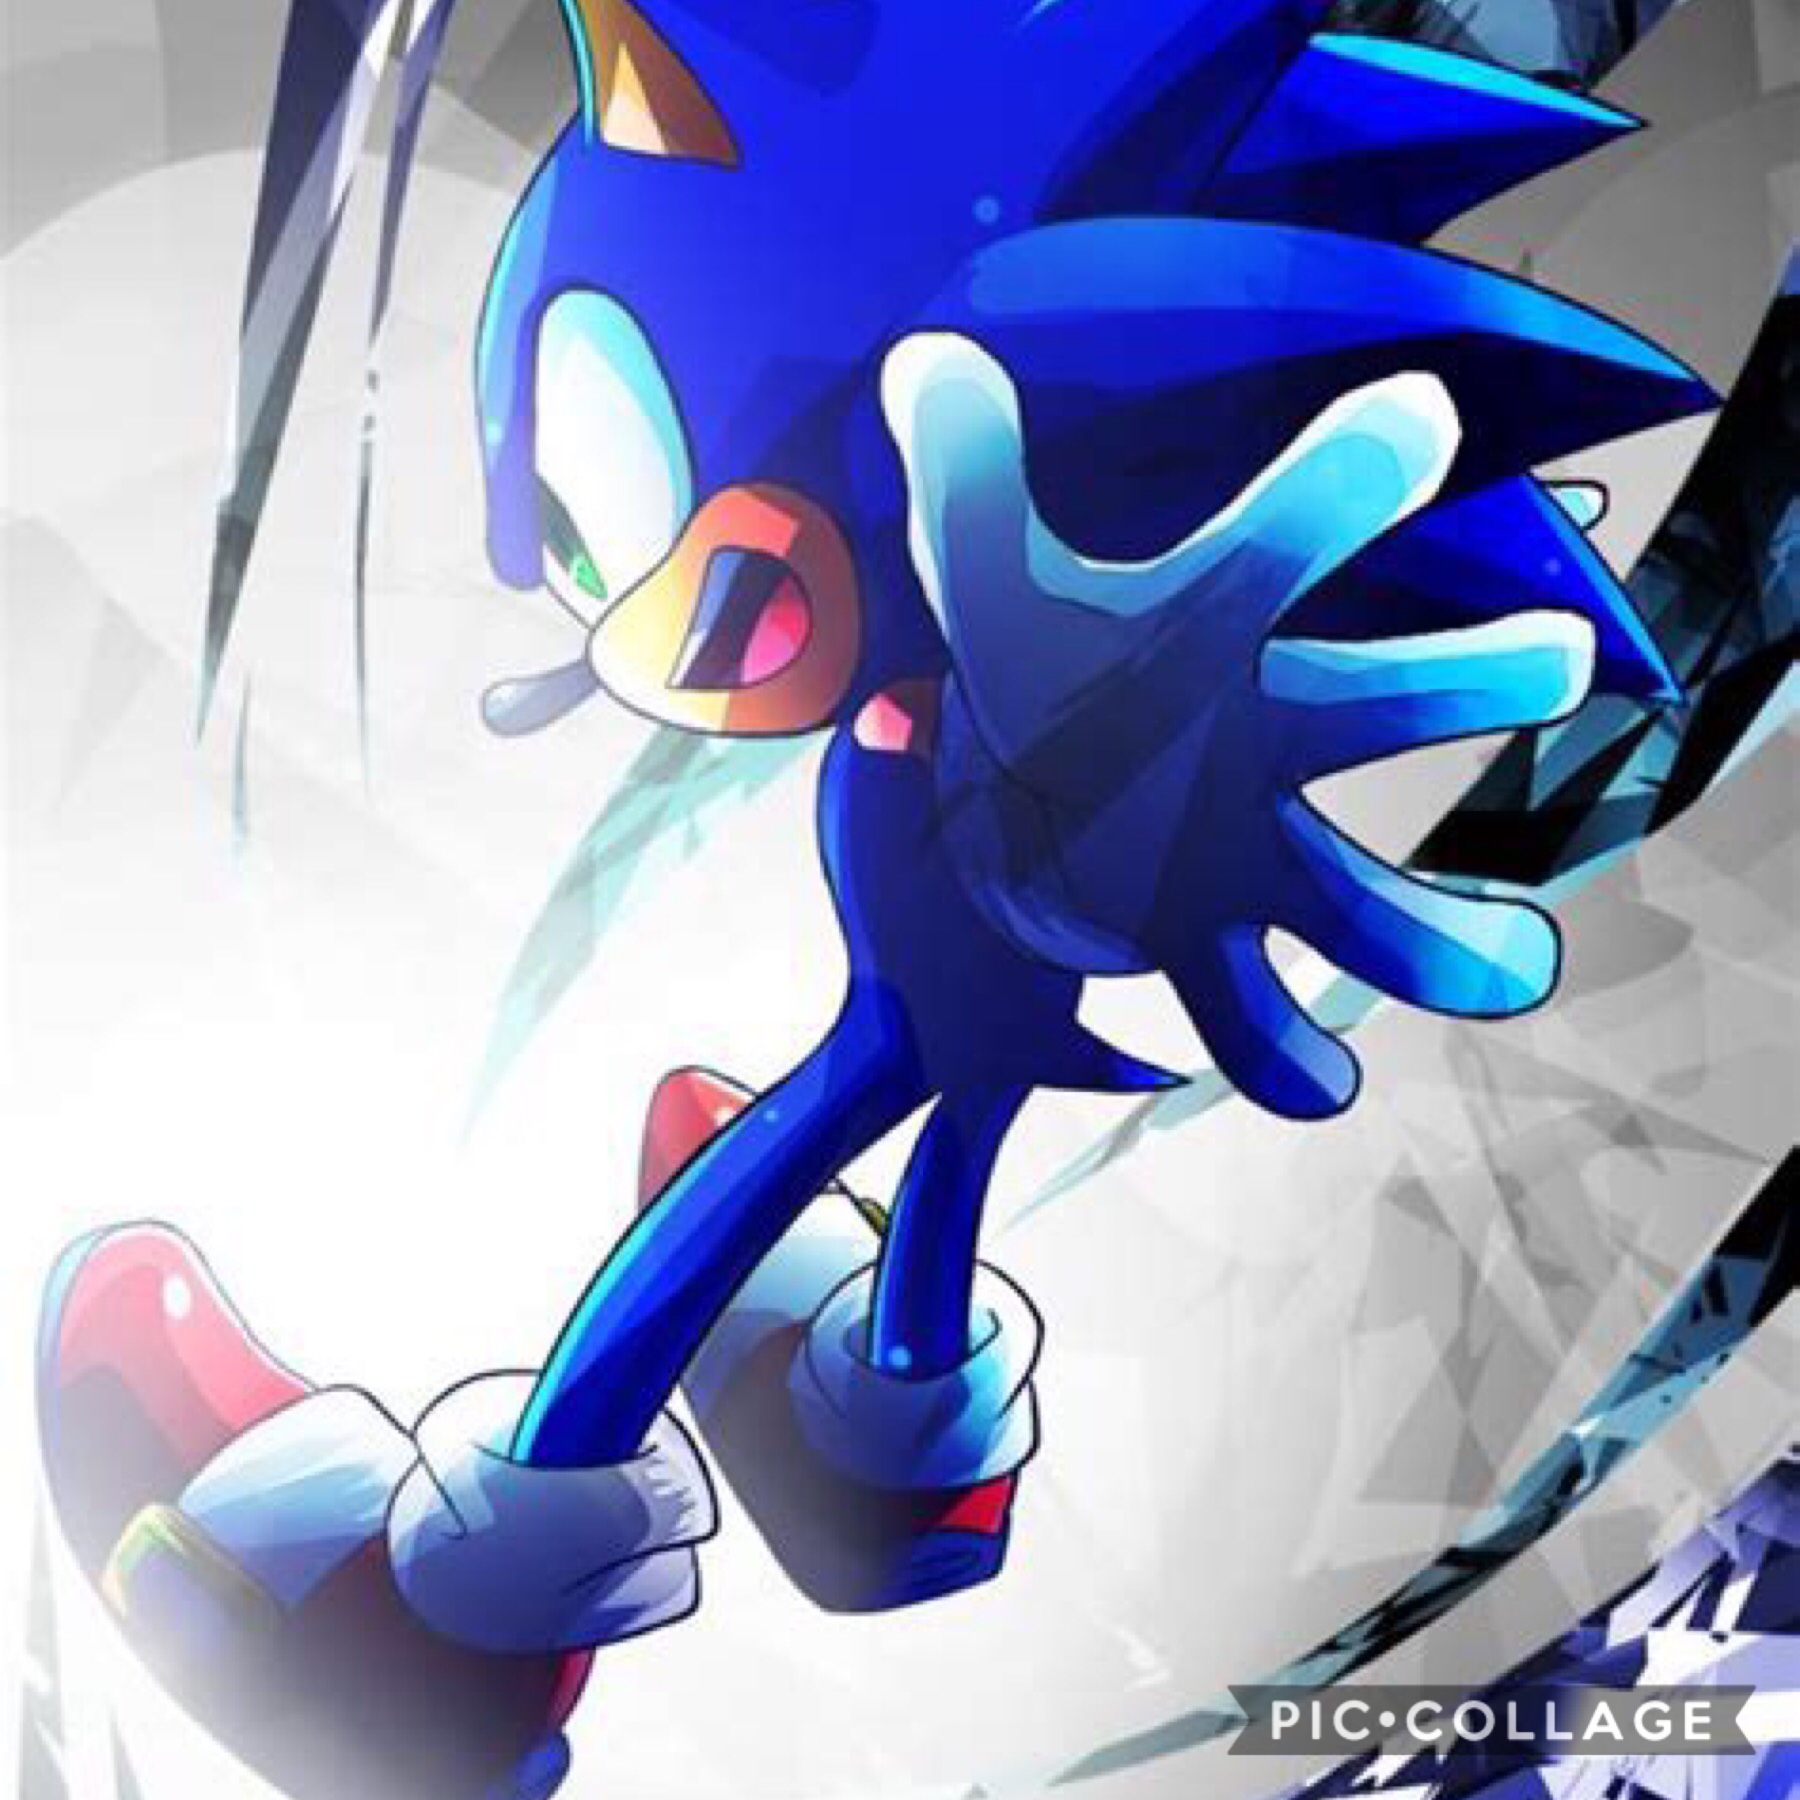 Tap 💙💙💙
Sonic the hedgehog 
Leader of the whole franchise 
Only the most popular sonic the hedgehog character considering the whole franchise is named after him. 🙄🥰
